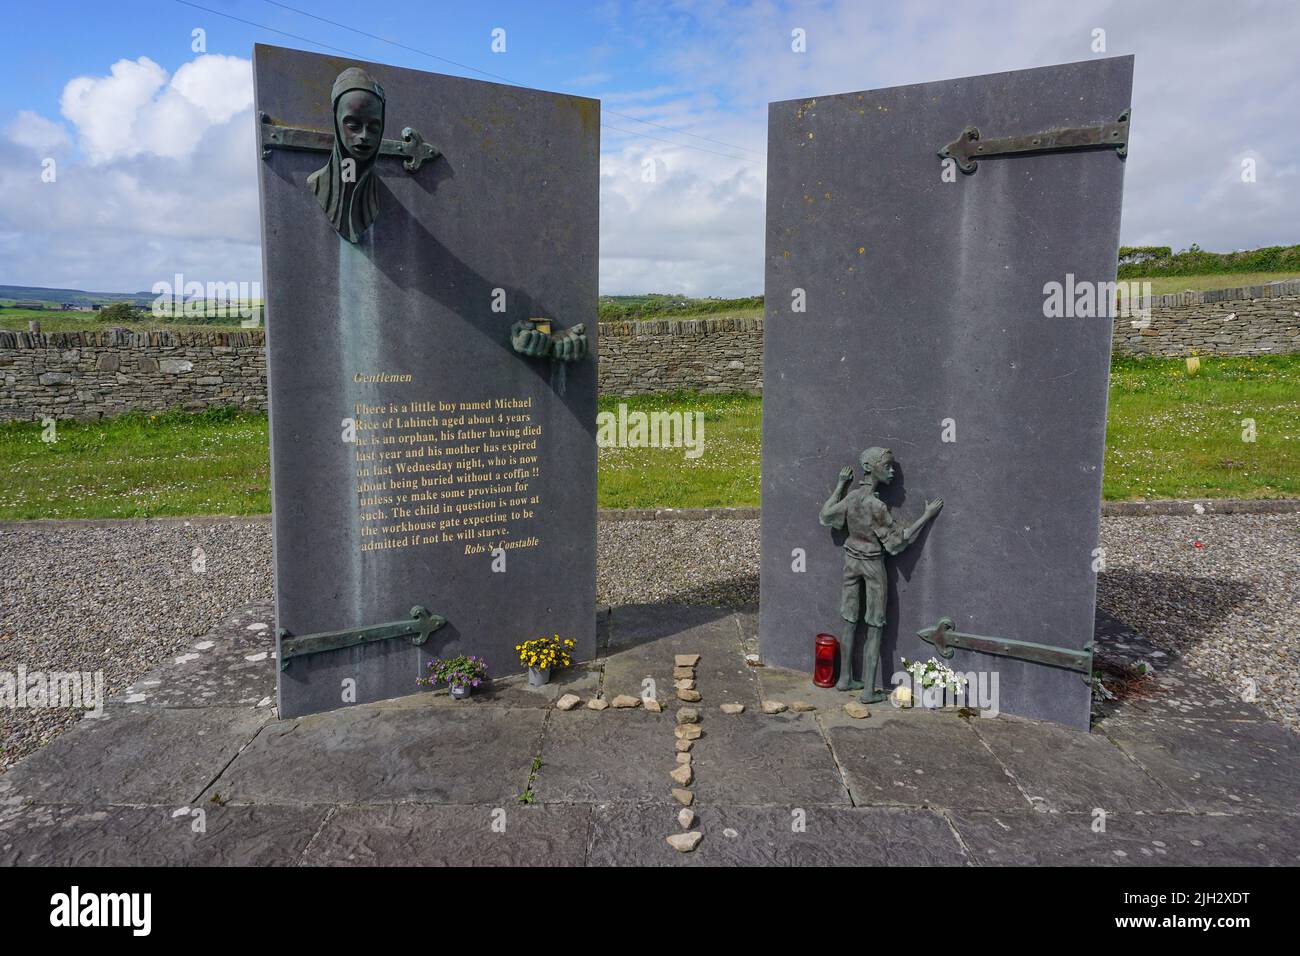 Ennistymon, Co. Clare, Ireland: An Gorta Mor (English: The Great Hunger) commemorates the victims of the Great Famine from 1845 to 1850. Stock Photo